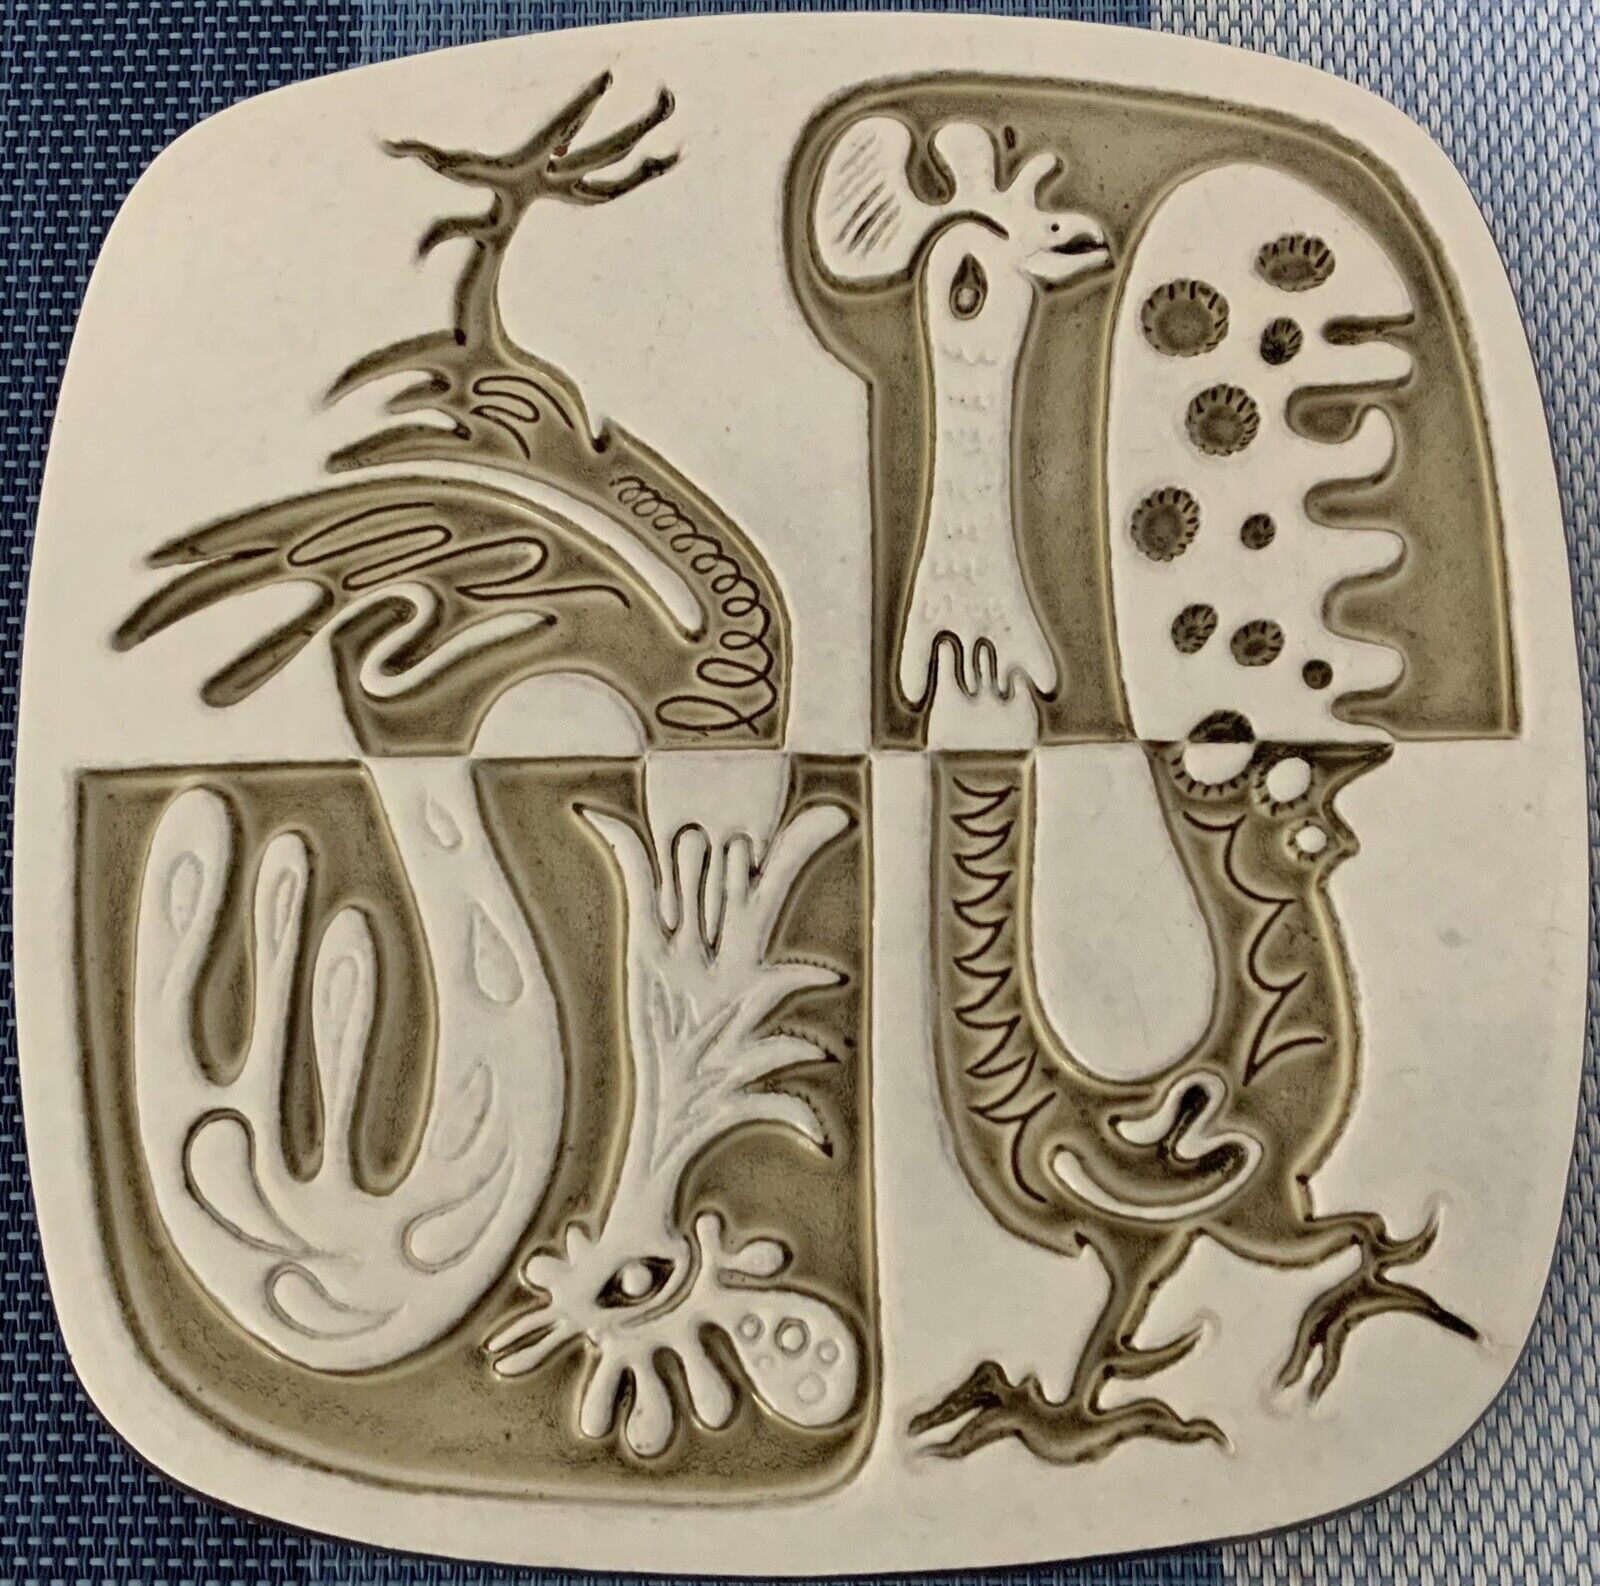 Kilnforms MCM Art Pottery Rooster Tile Trivet Clay Pottery Friley-Fistick Ohio